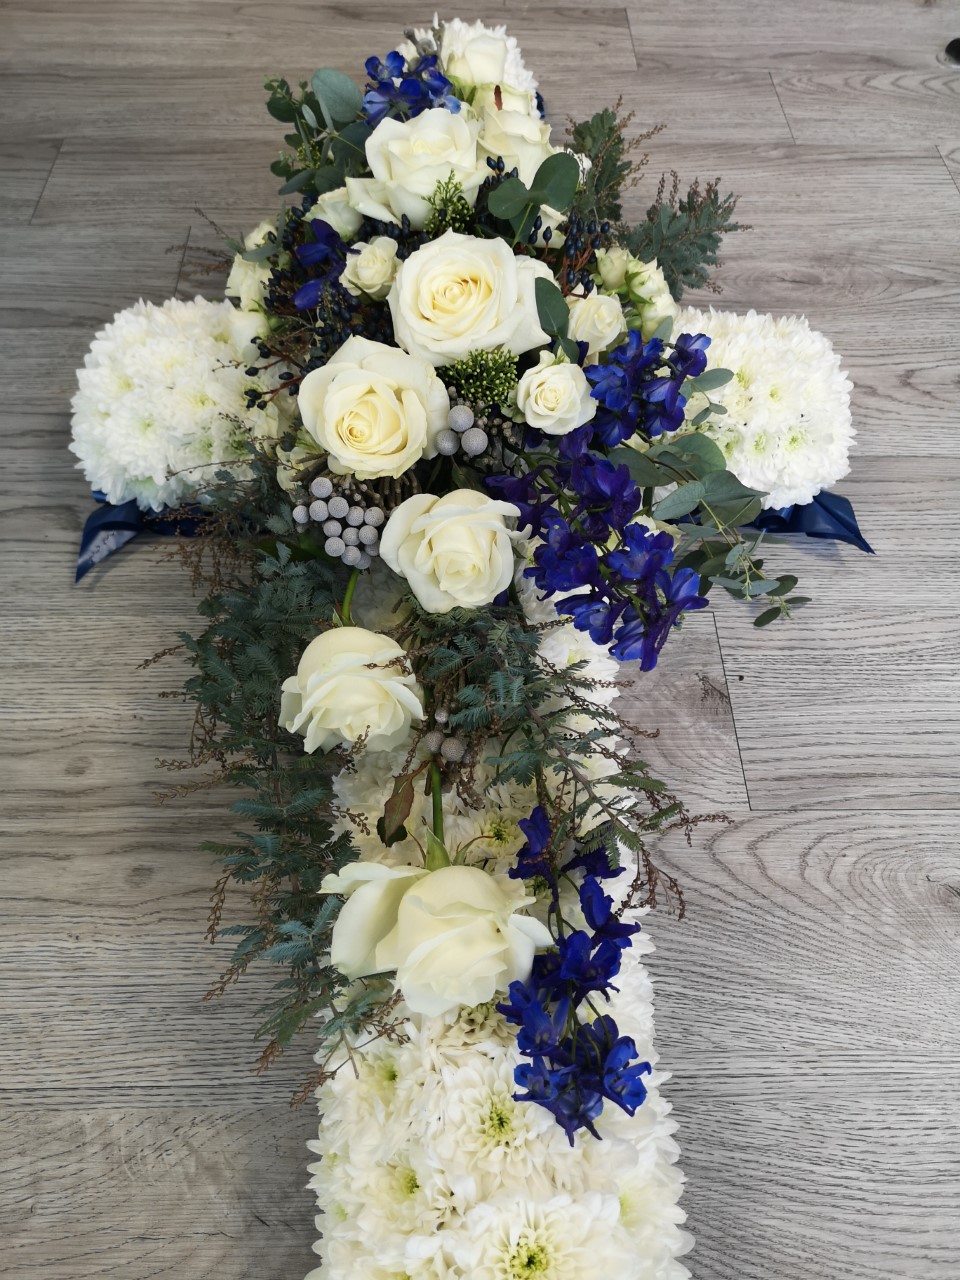 Funeral Flowers White Cross From £75